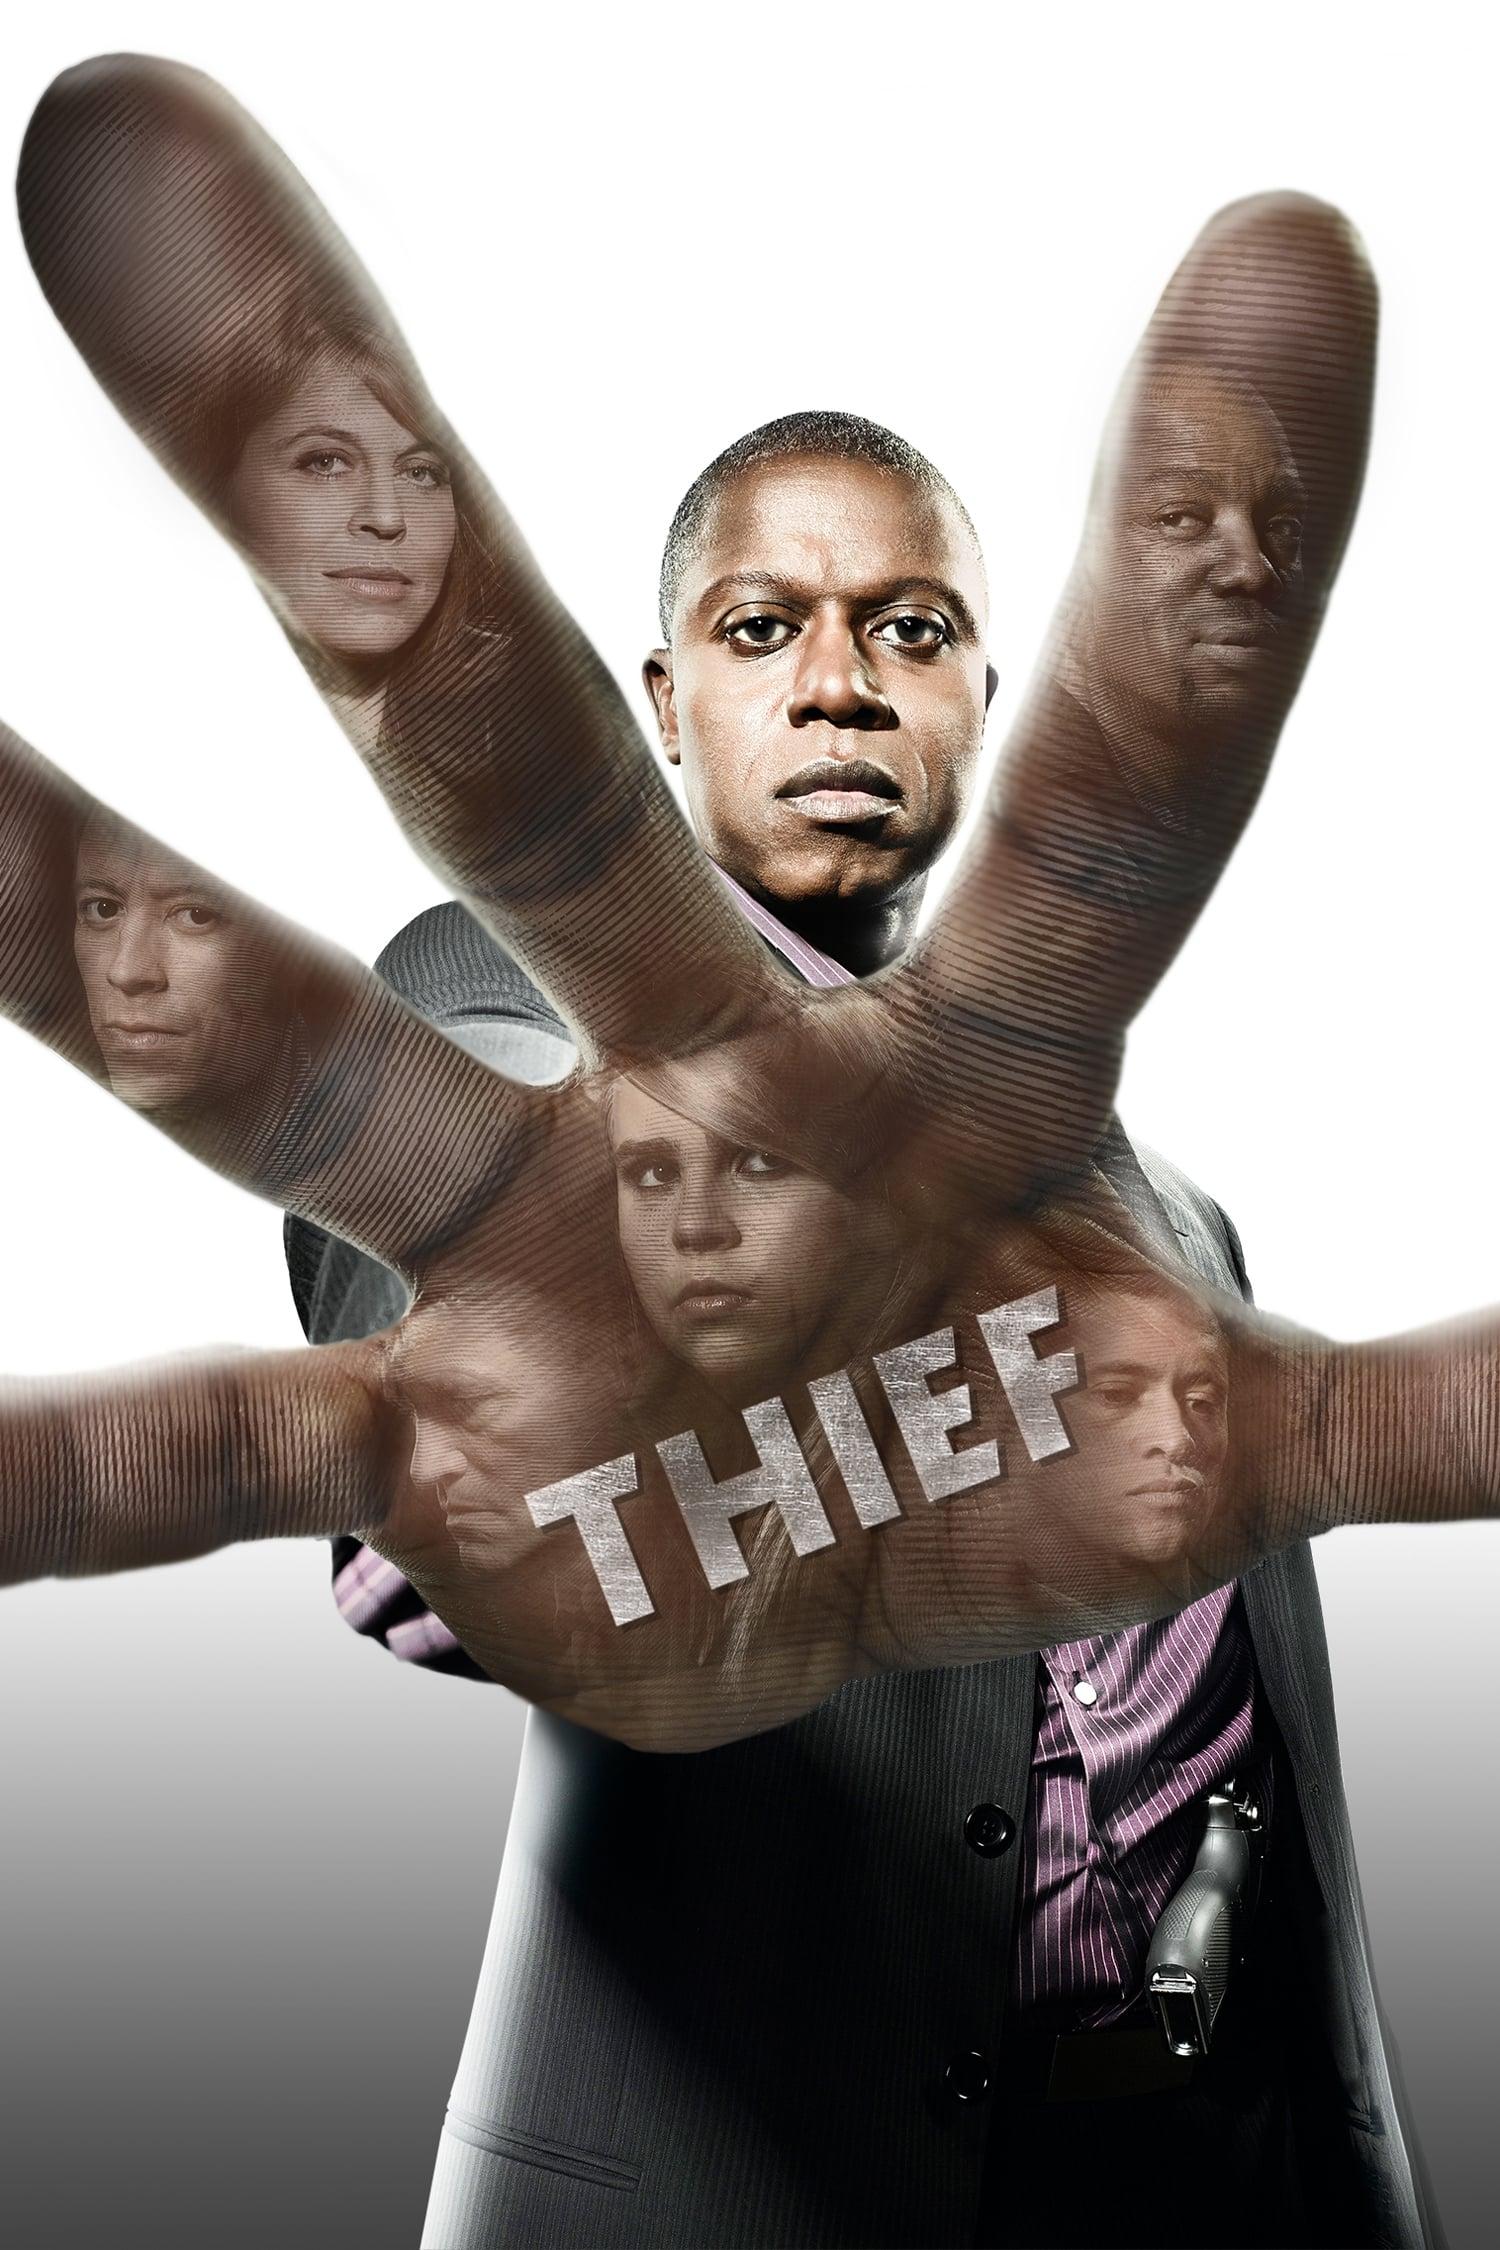 Thief poster